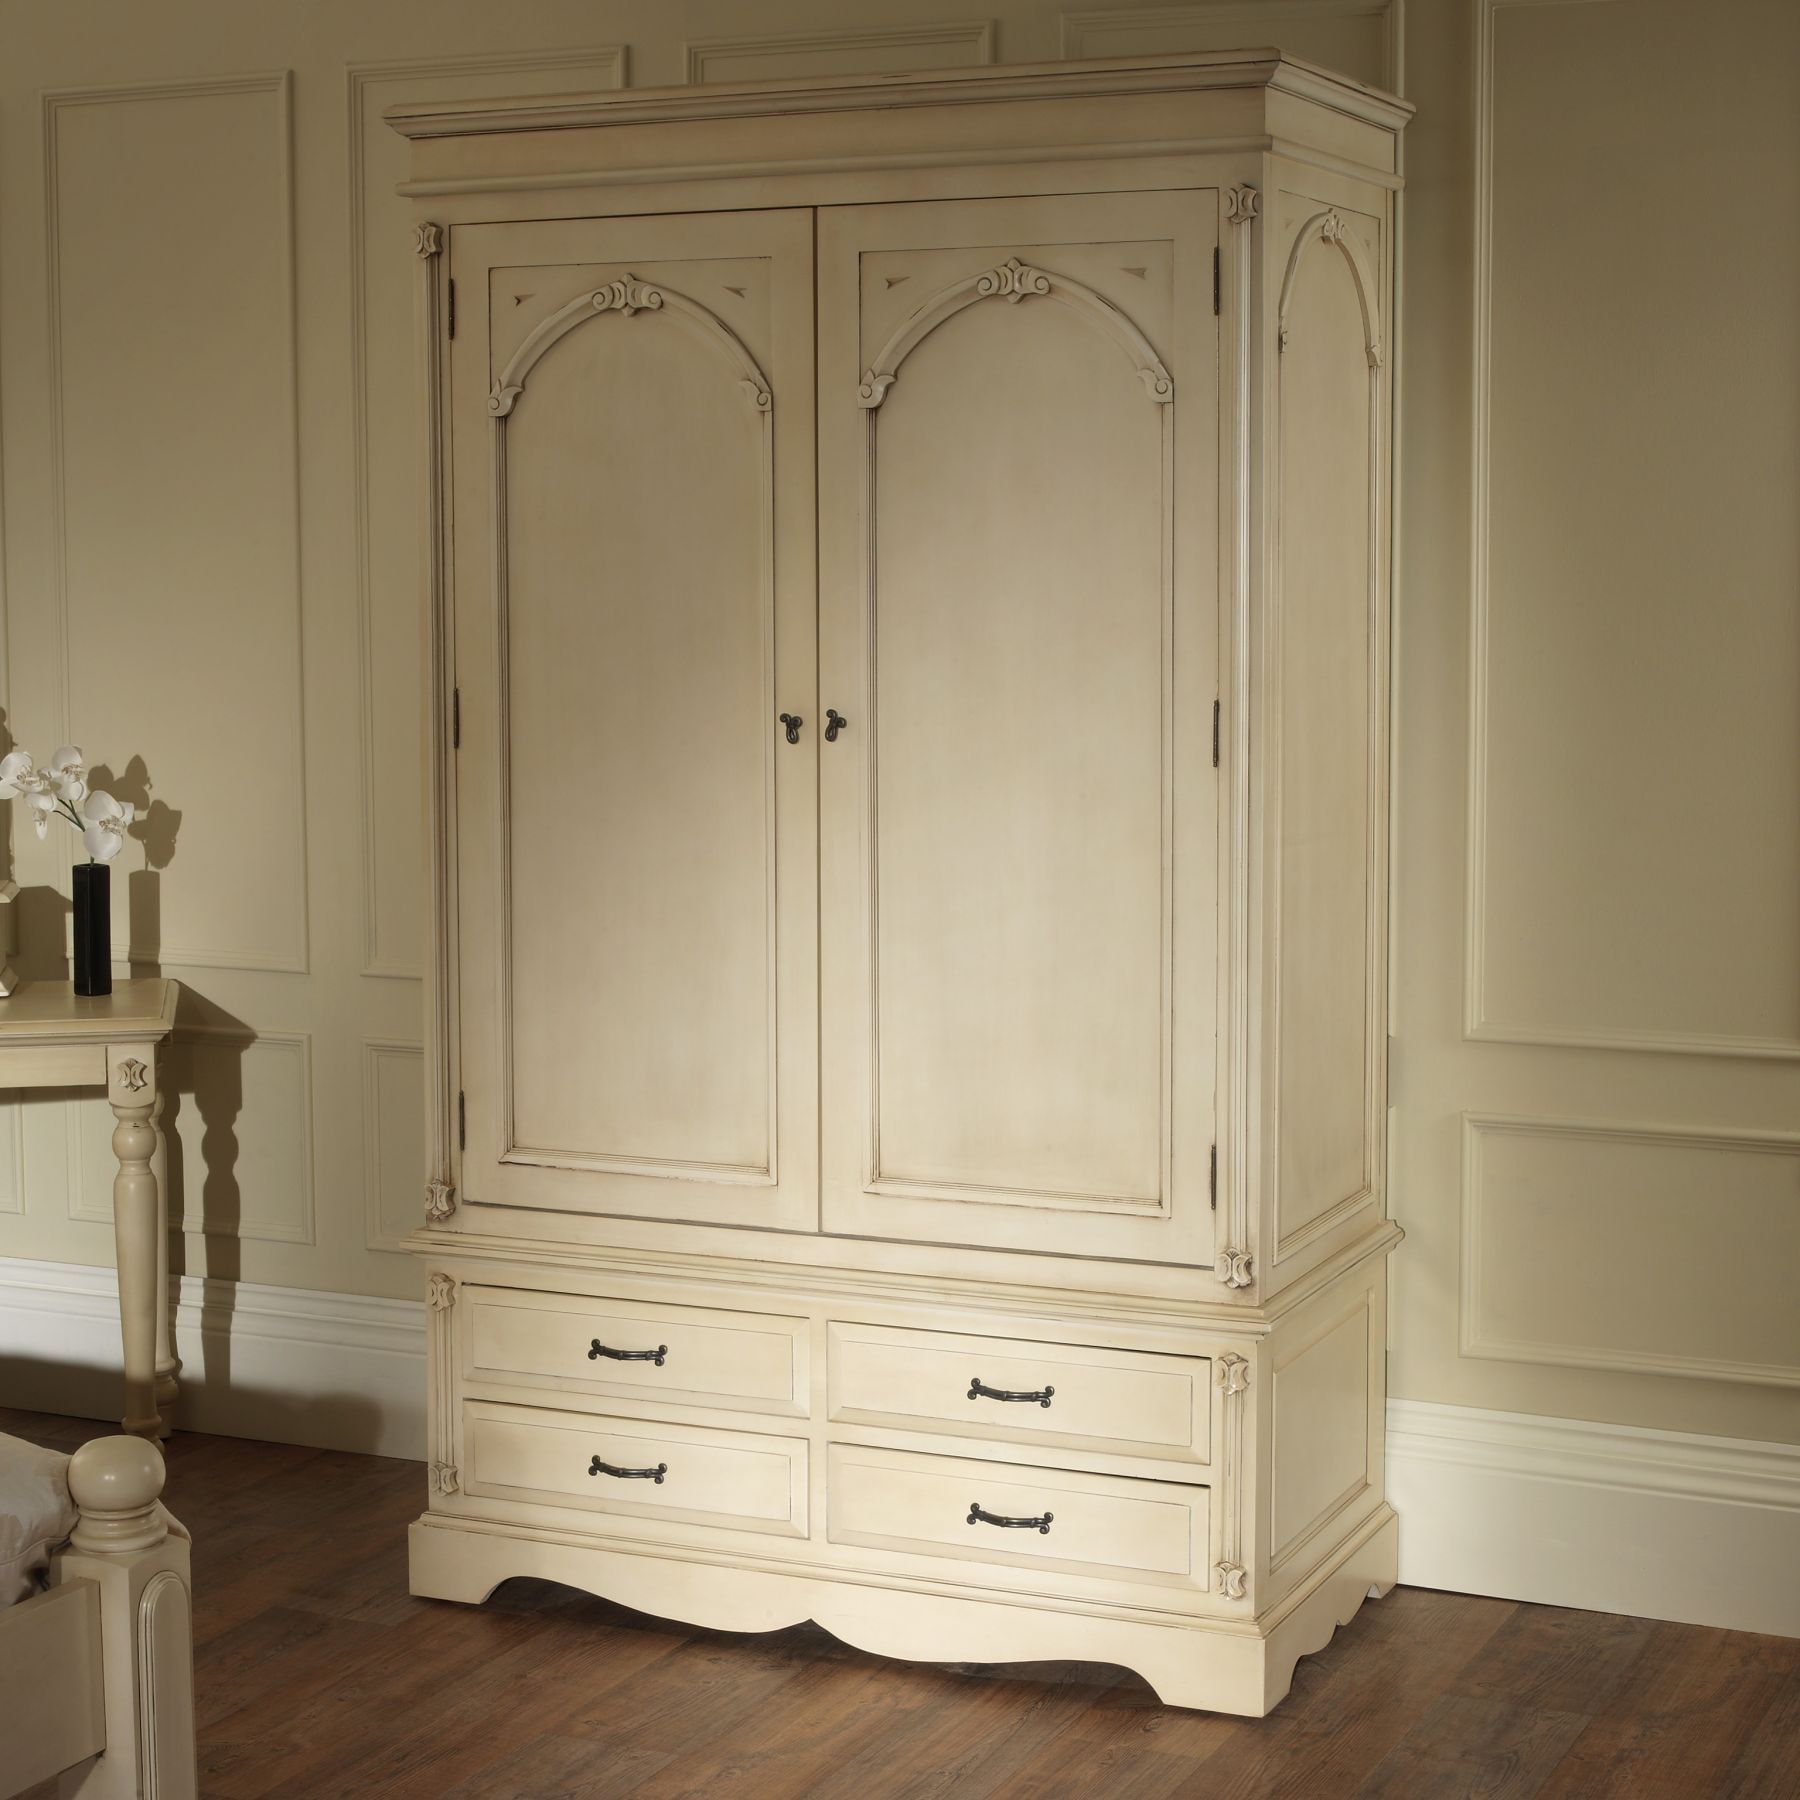 Victorian Antique French Wardrobe Works Well Alongside Our Shabby Chic  Furniture Intended For Victorian Style Wardrobes (View 2 of 15)